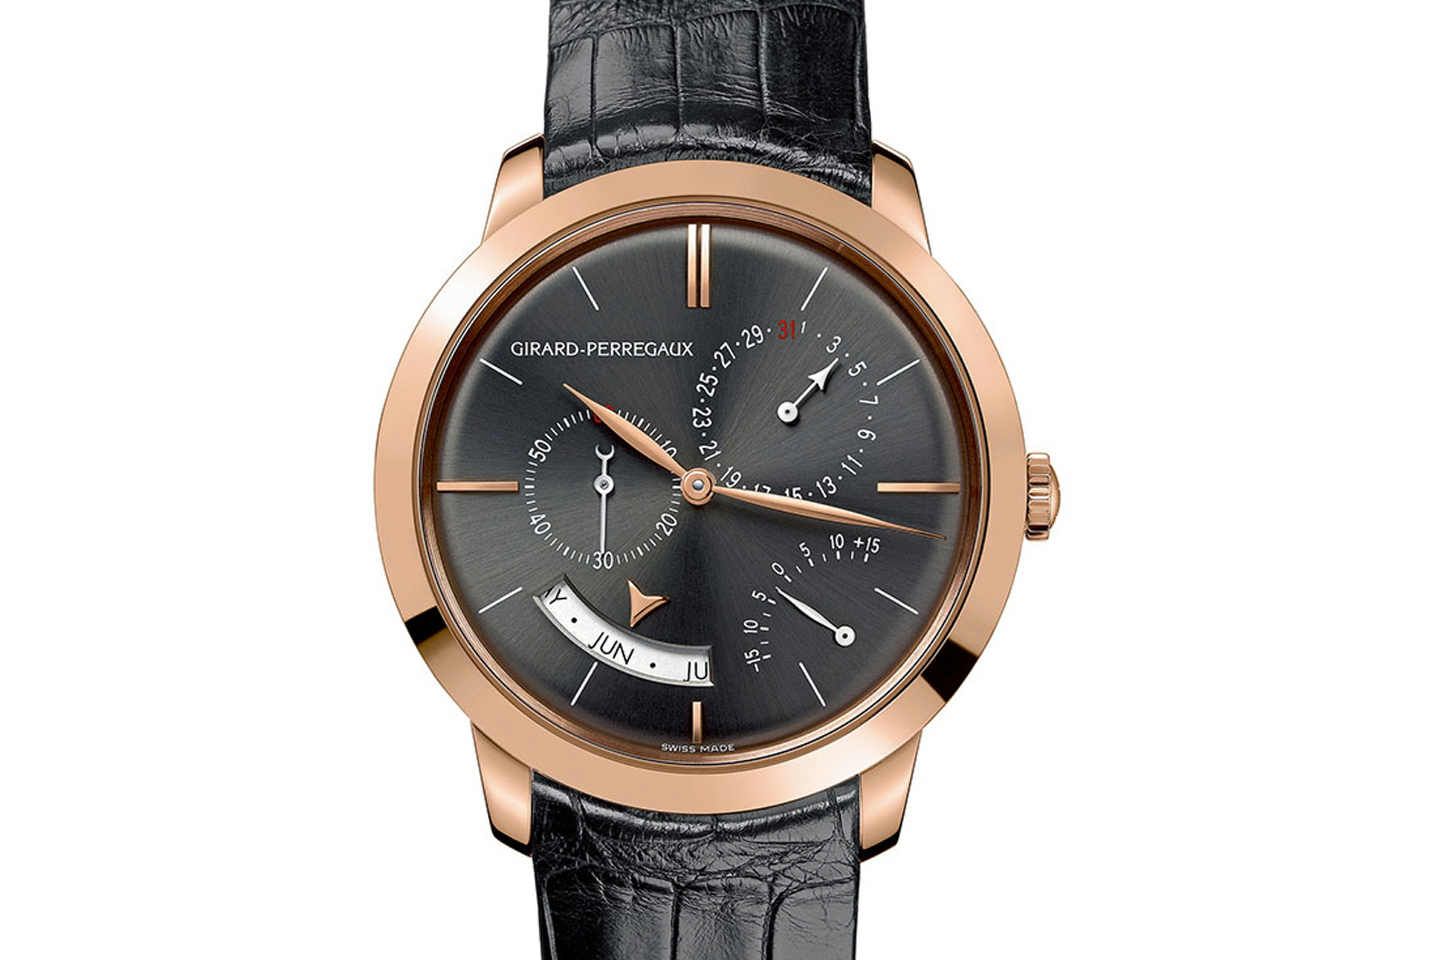 Girard-Perregaux 1966 Annual Calendar and Equation of Time SIHH 2012